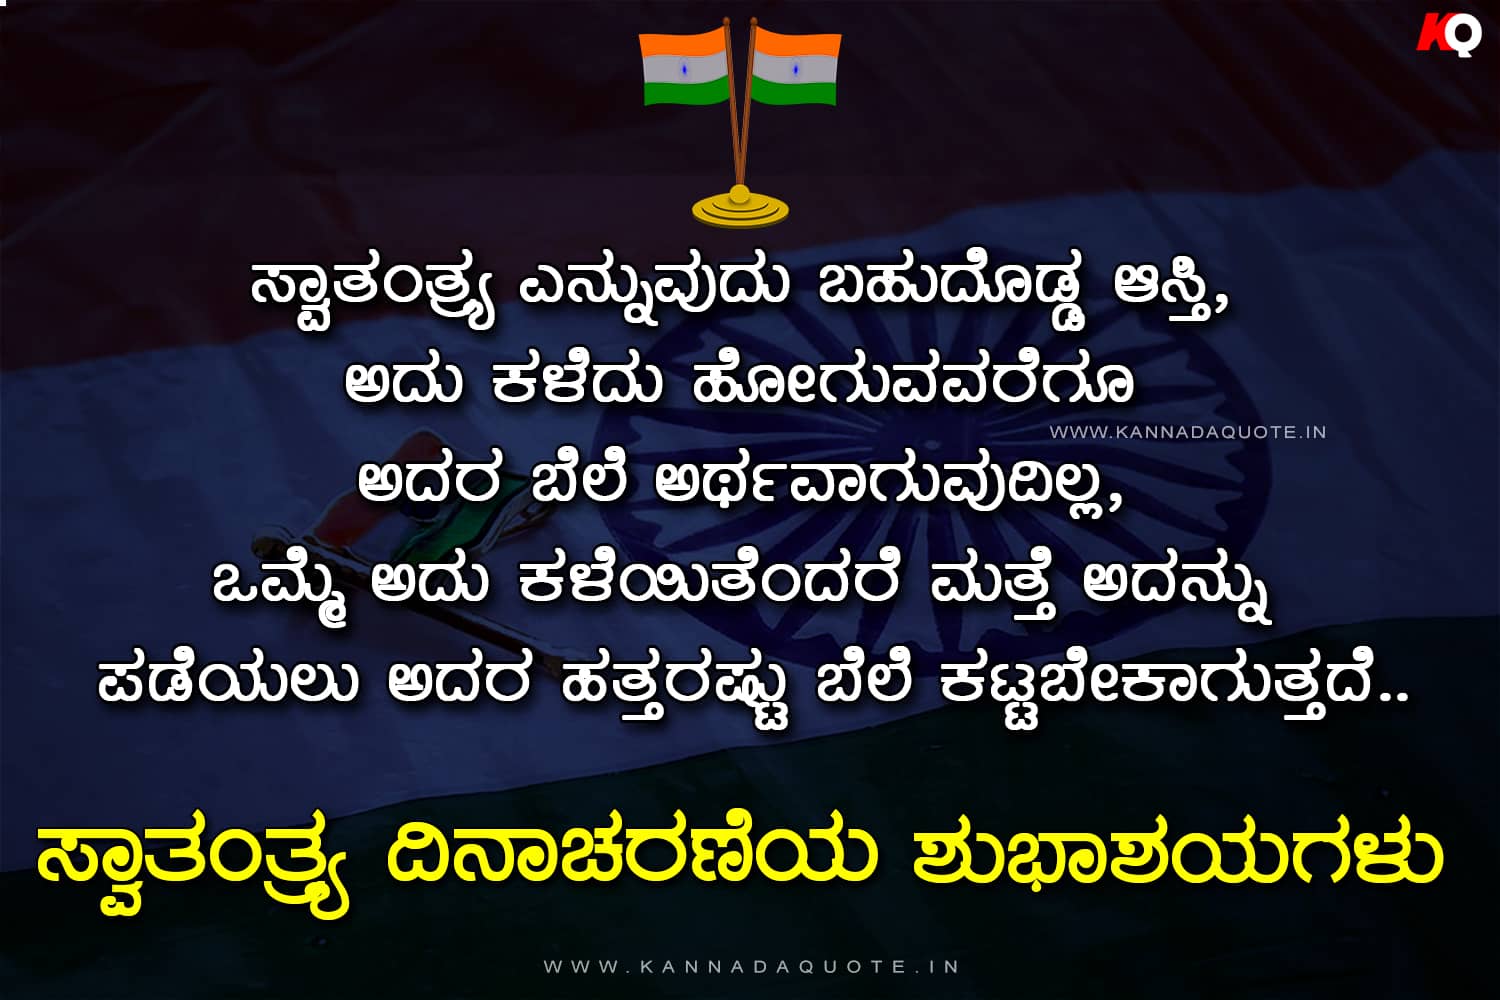 Message independence day quotes in kannada